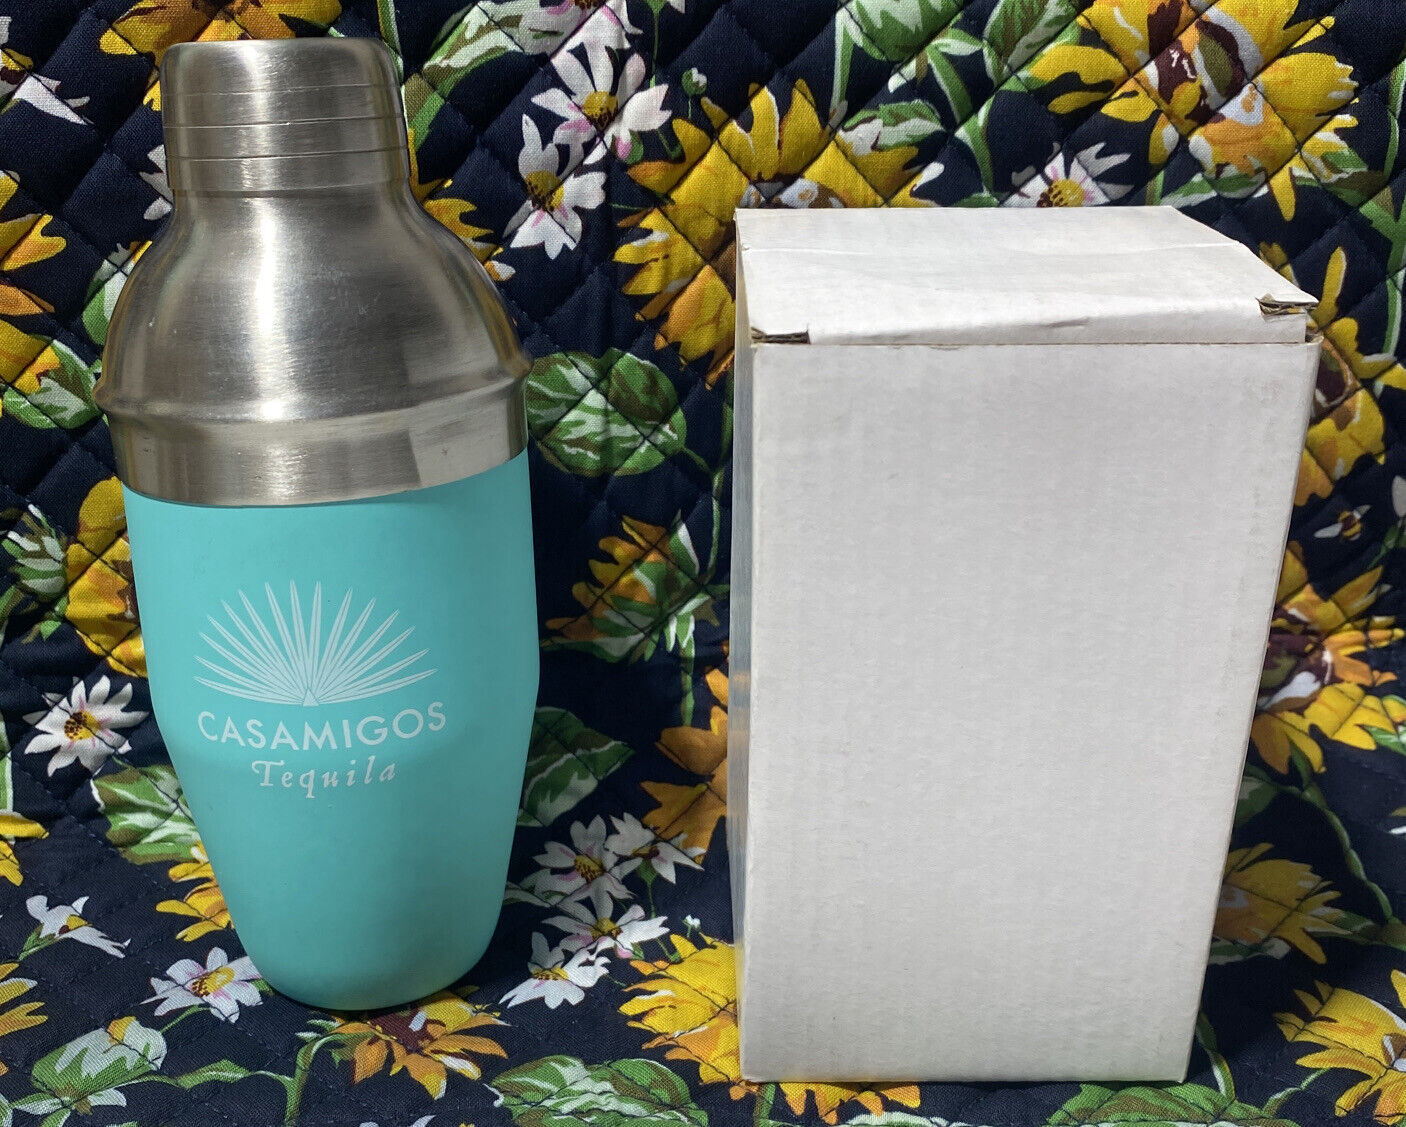 Casamigos Tequila Drink Cocktail Shaker Green George Clooney Logo Green 3 piece